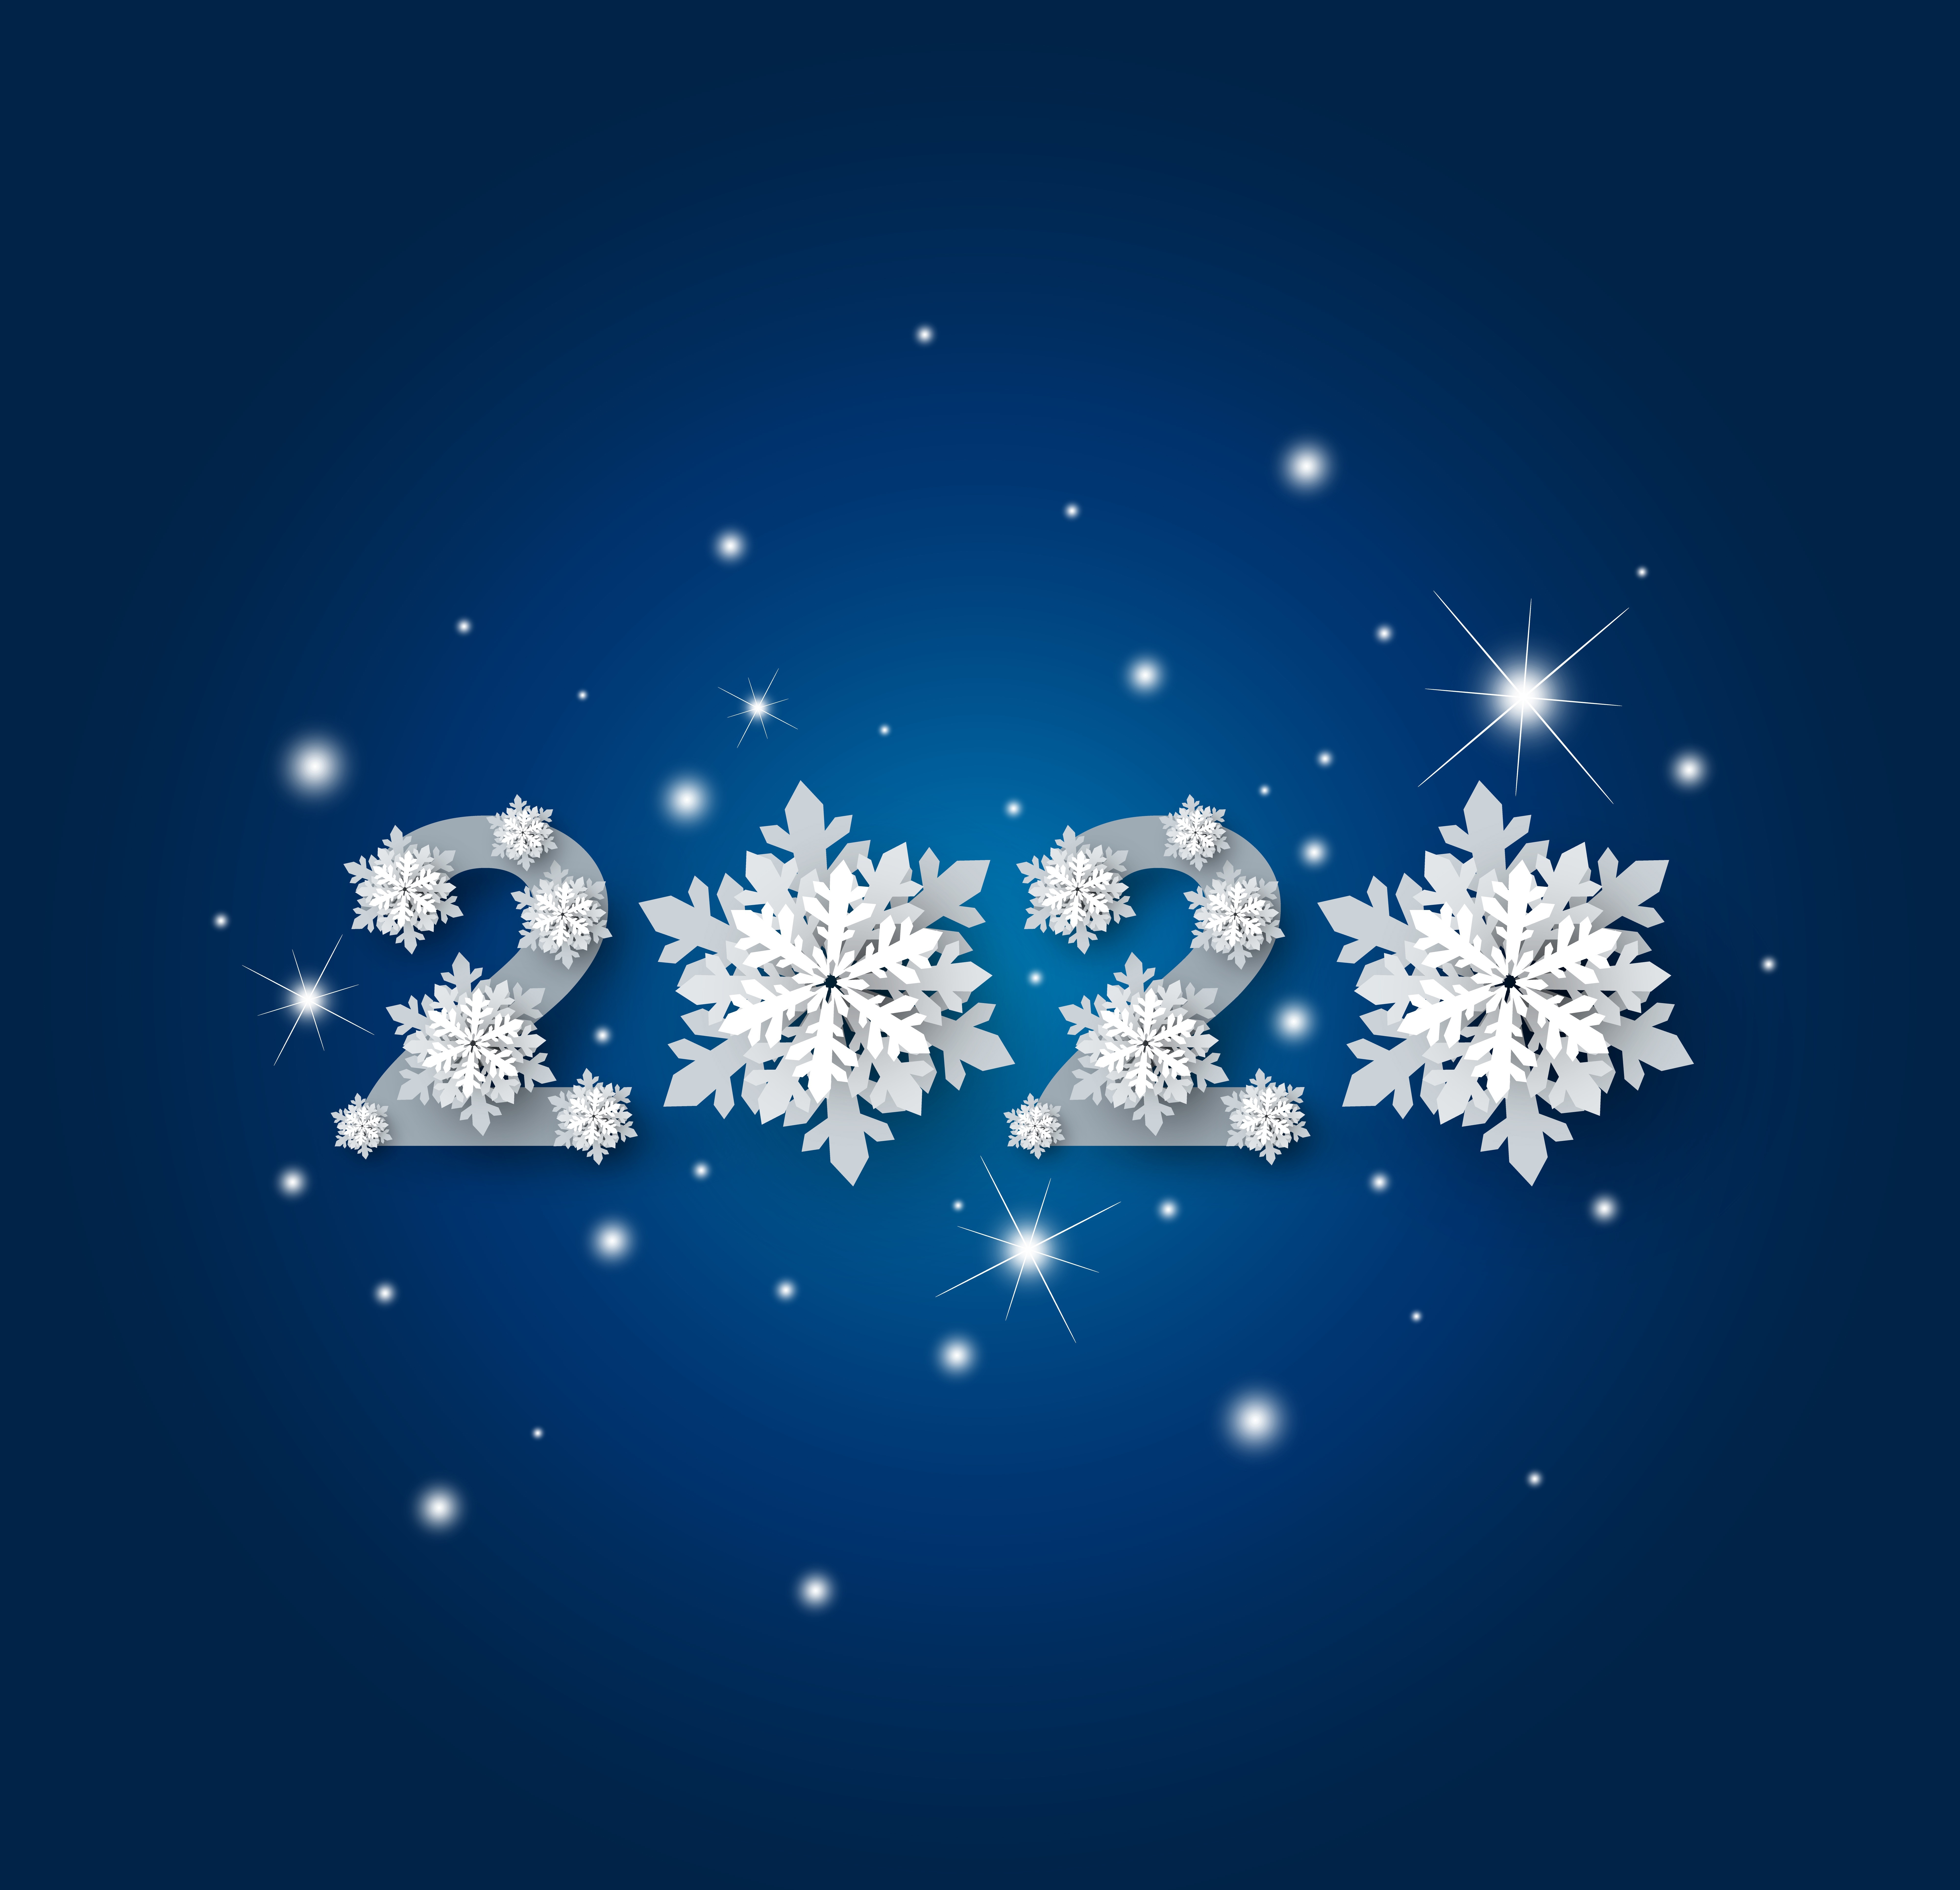 Image: Numbers, 2020, new year, snowflakes, blue background